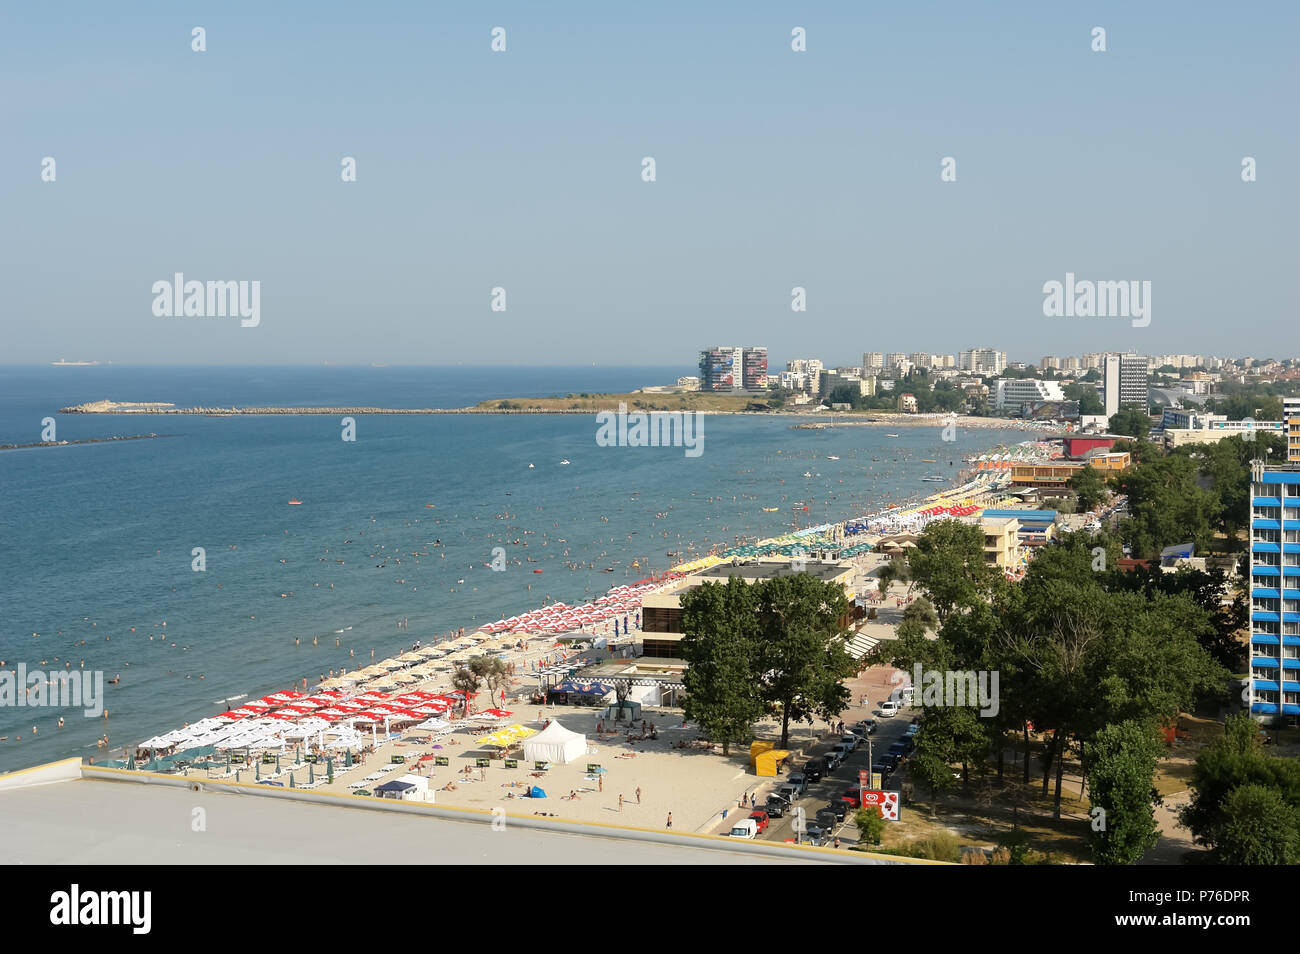 Constanta, Romania - July 4, 2012: Panoramic view of the coast of the Black Sea resort of Mamaia with sandy beaches. Stock Photo